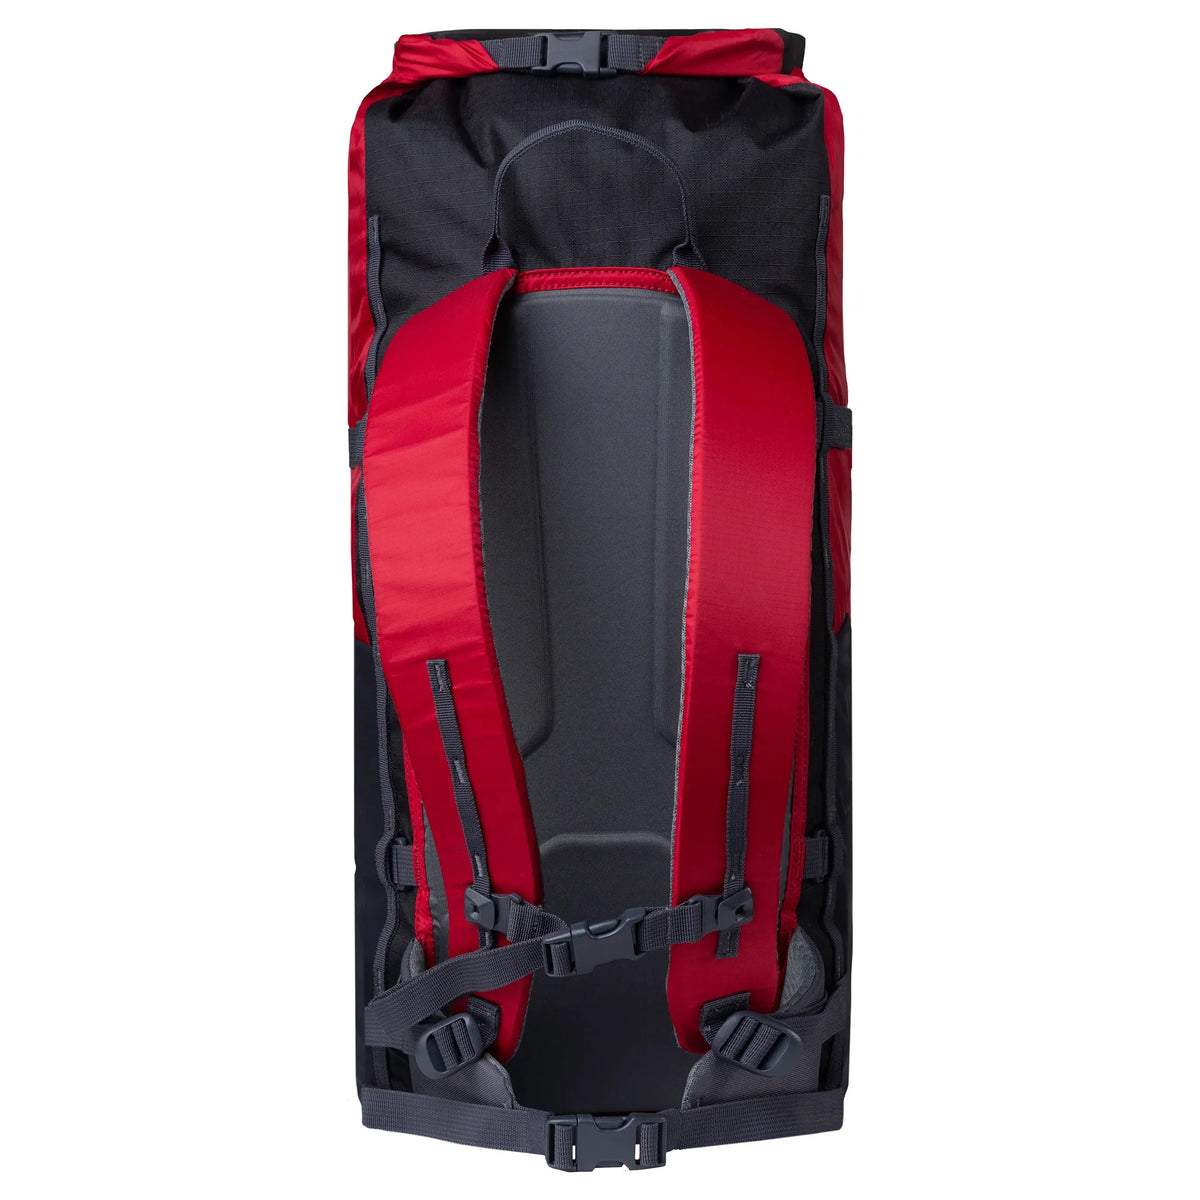 Trekmates Drypack RS 30 Litre Day Pack - Chilli Pepper Red